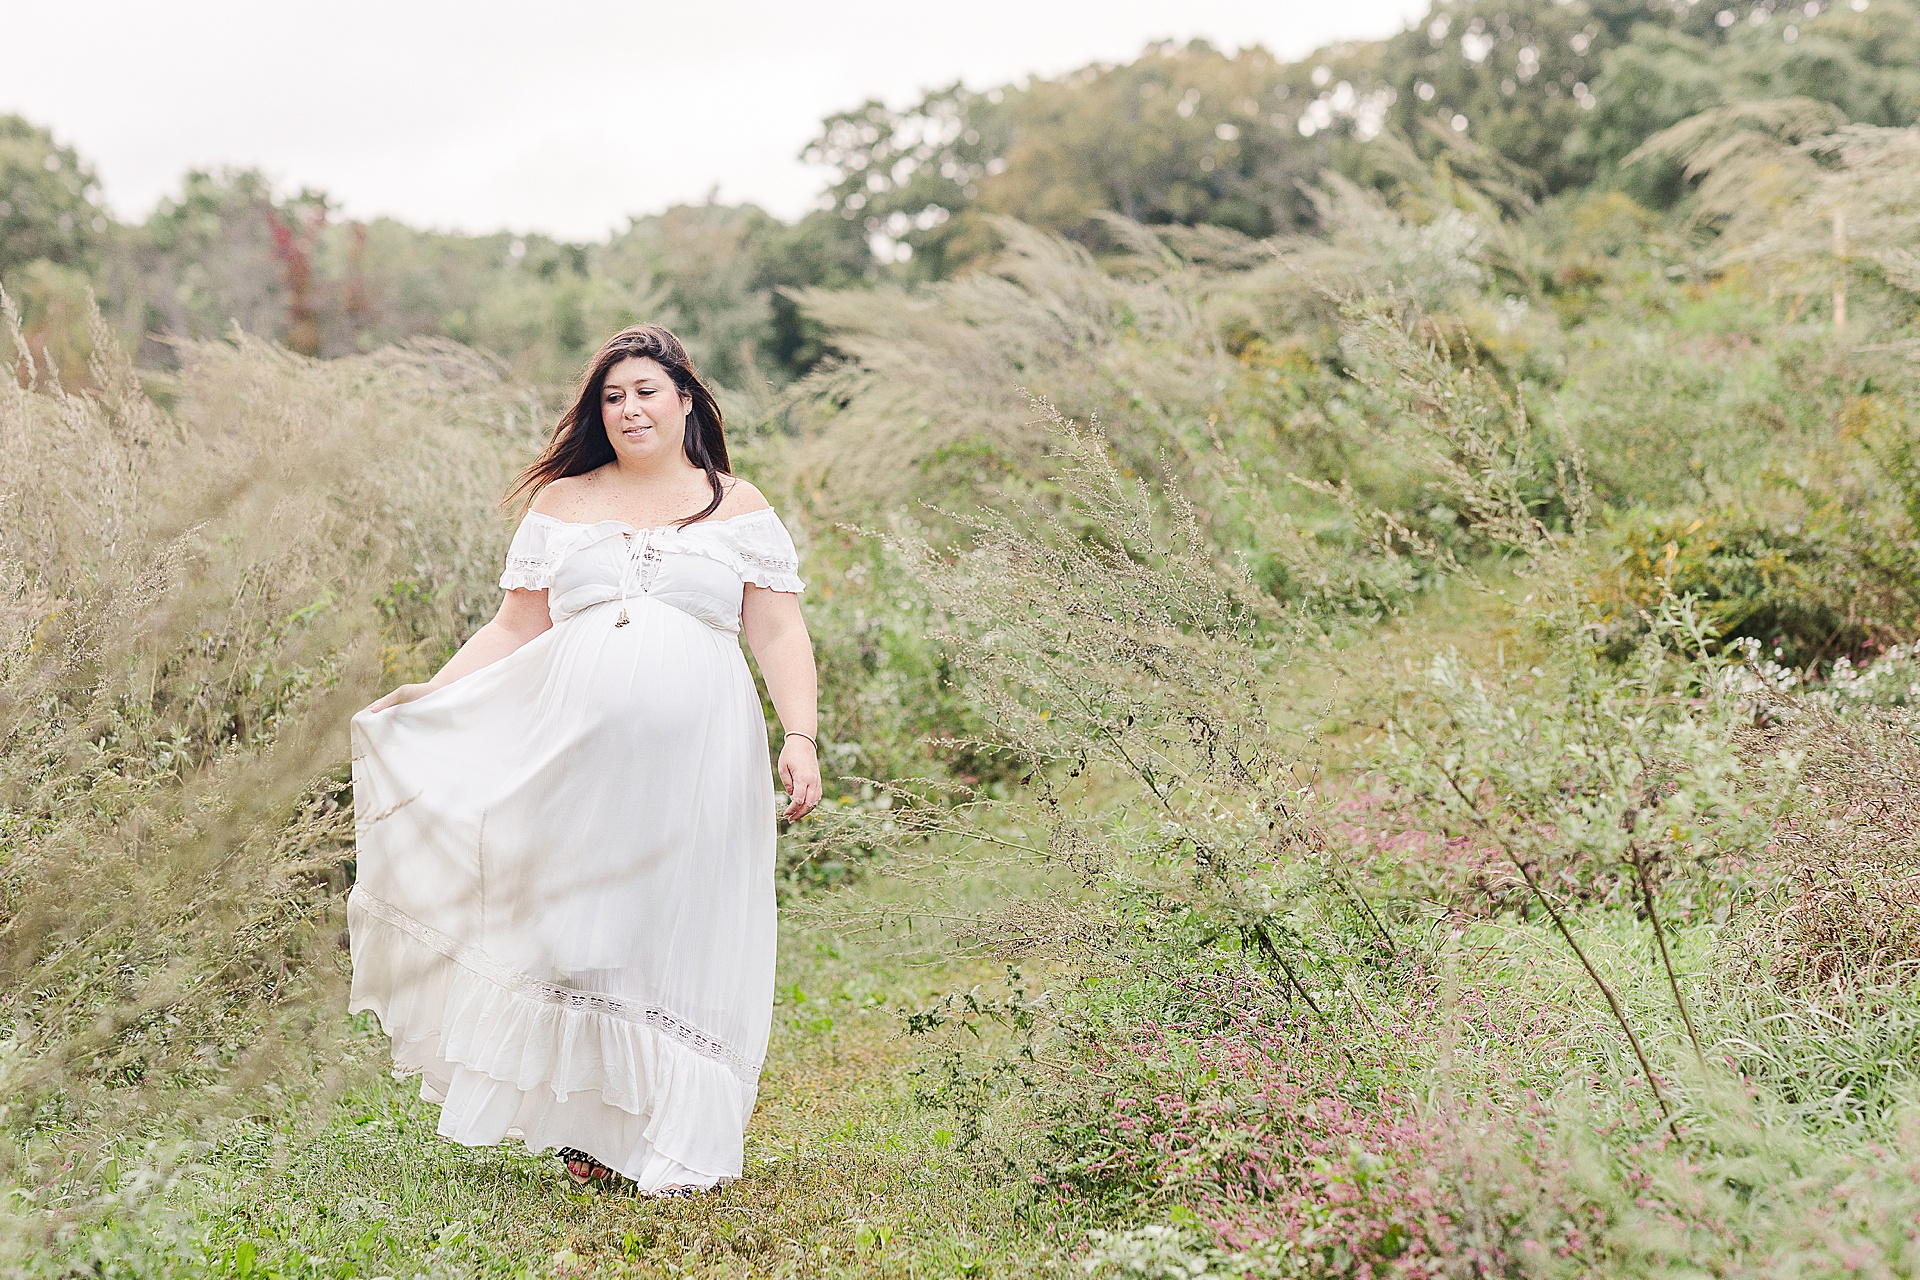 maternity photo session at Centennial Reservation, Wellesley Massachusetts with Sara Sniderman Photography 